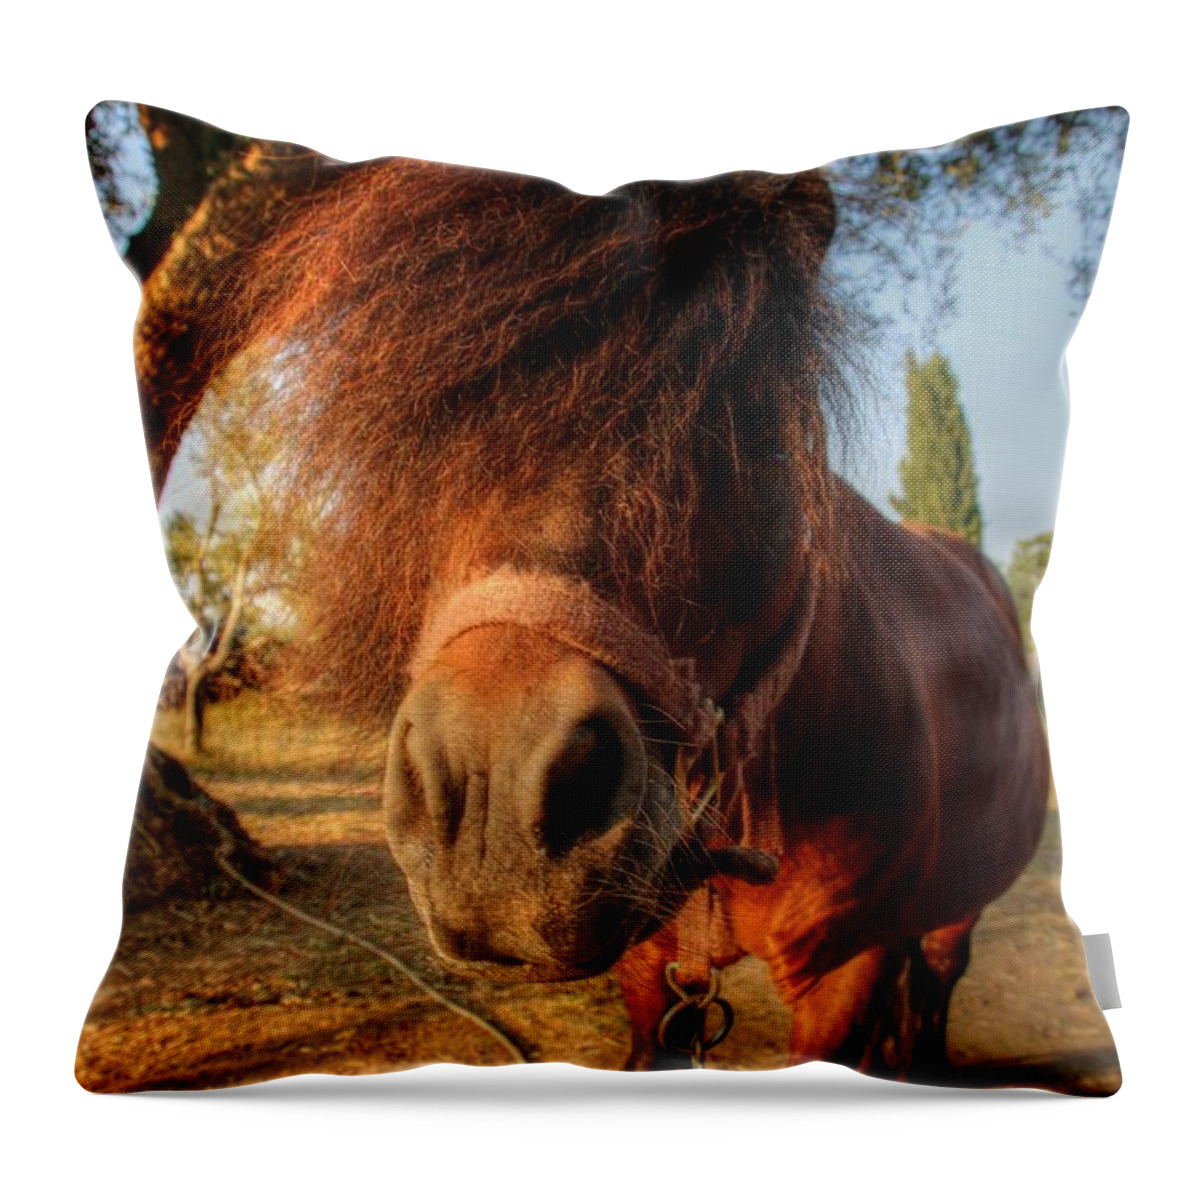 Olympia Greece Throw Pillow featuring the photograph Olympia Greece #1 by Paul James Bannerman